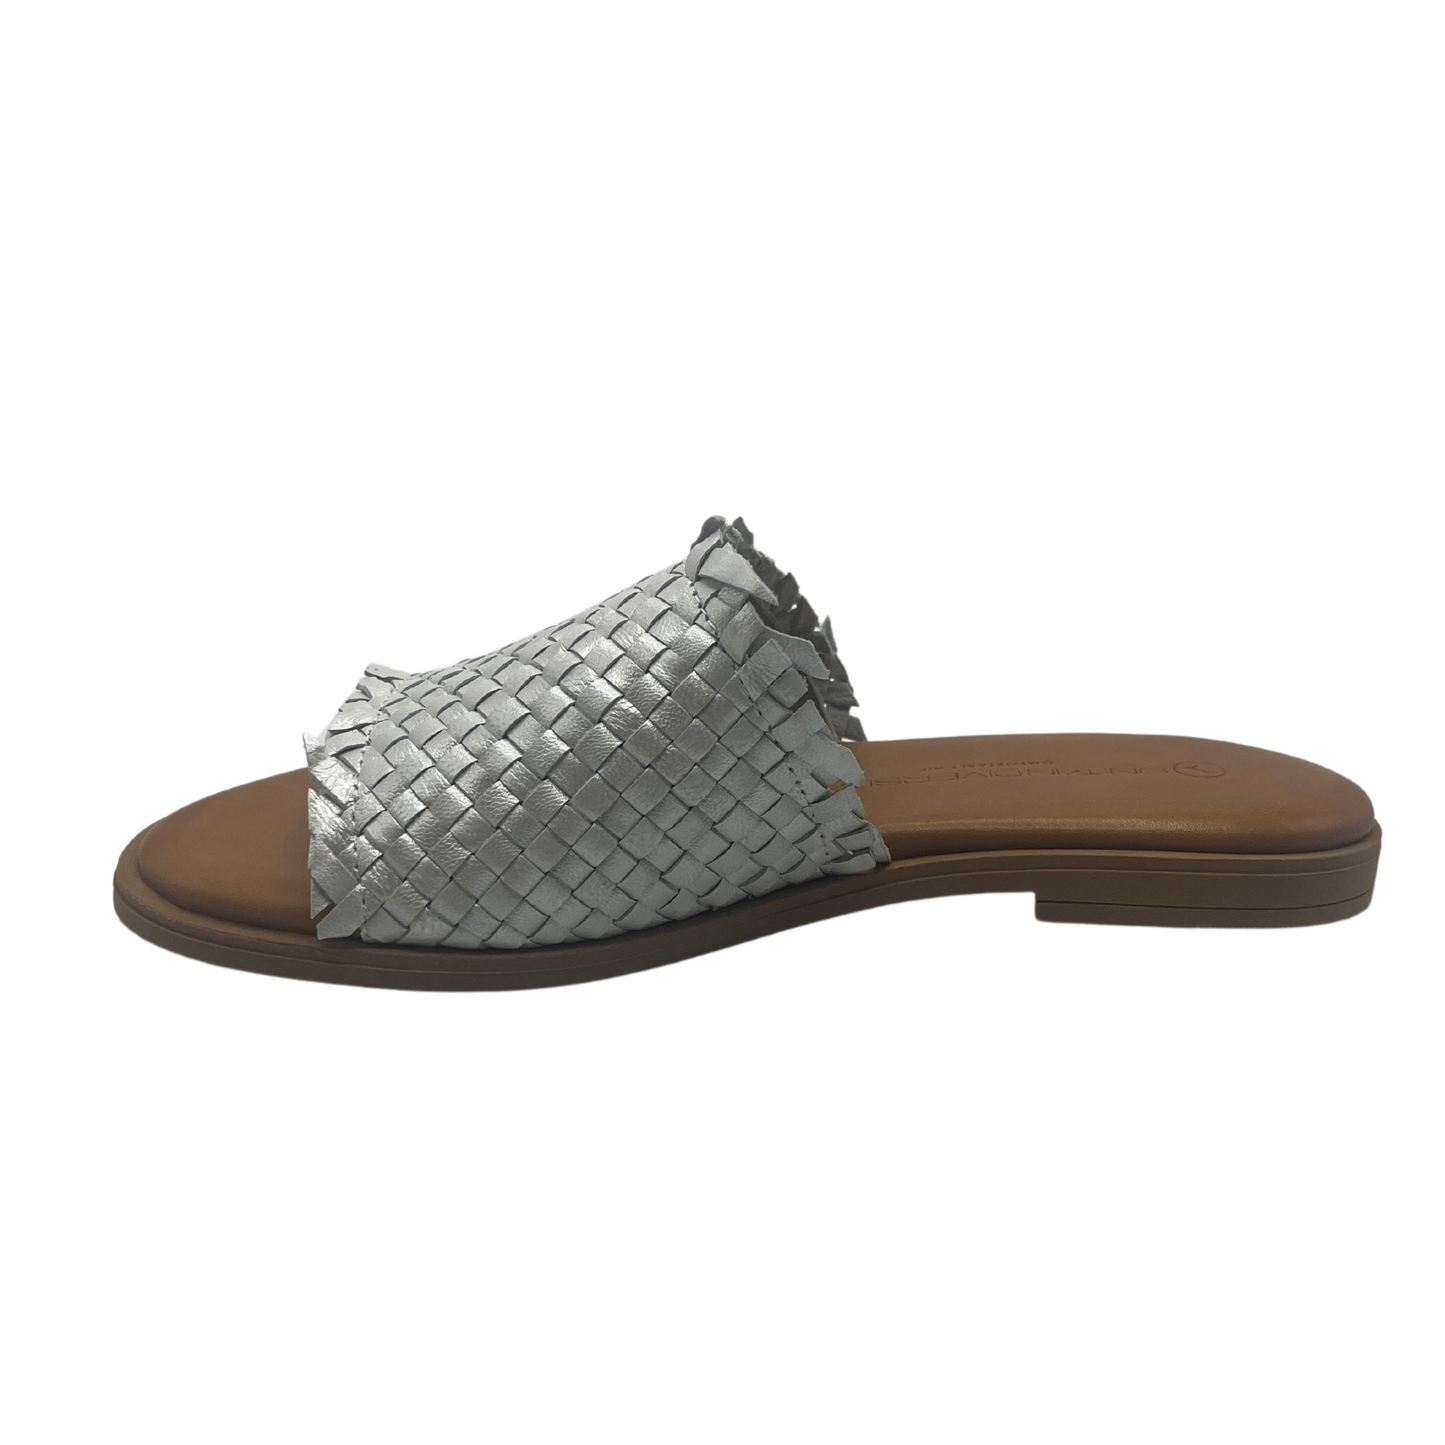 Left facing view of silver woven leather slip on sandals with lined footbed and low heel